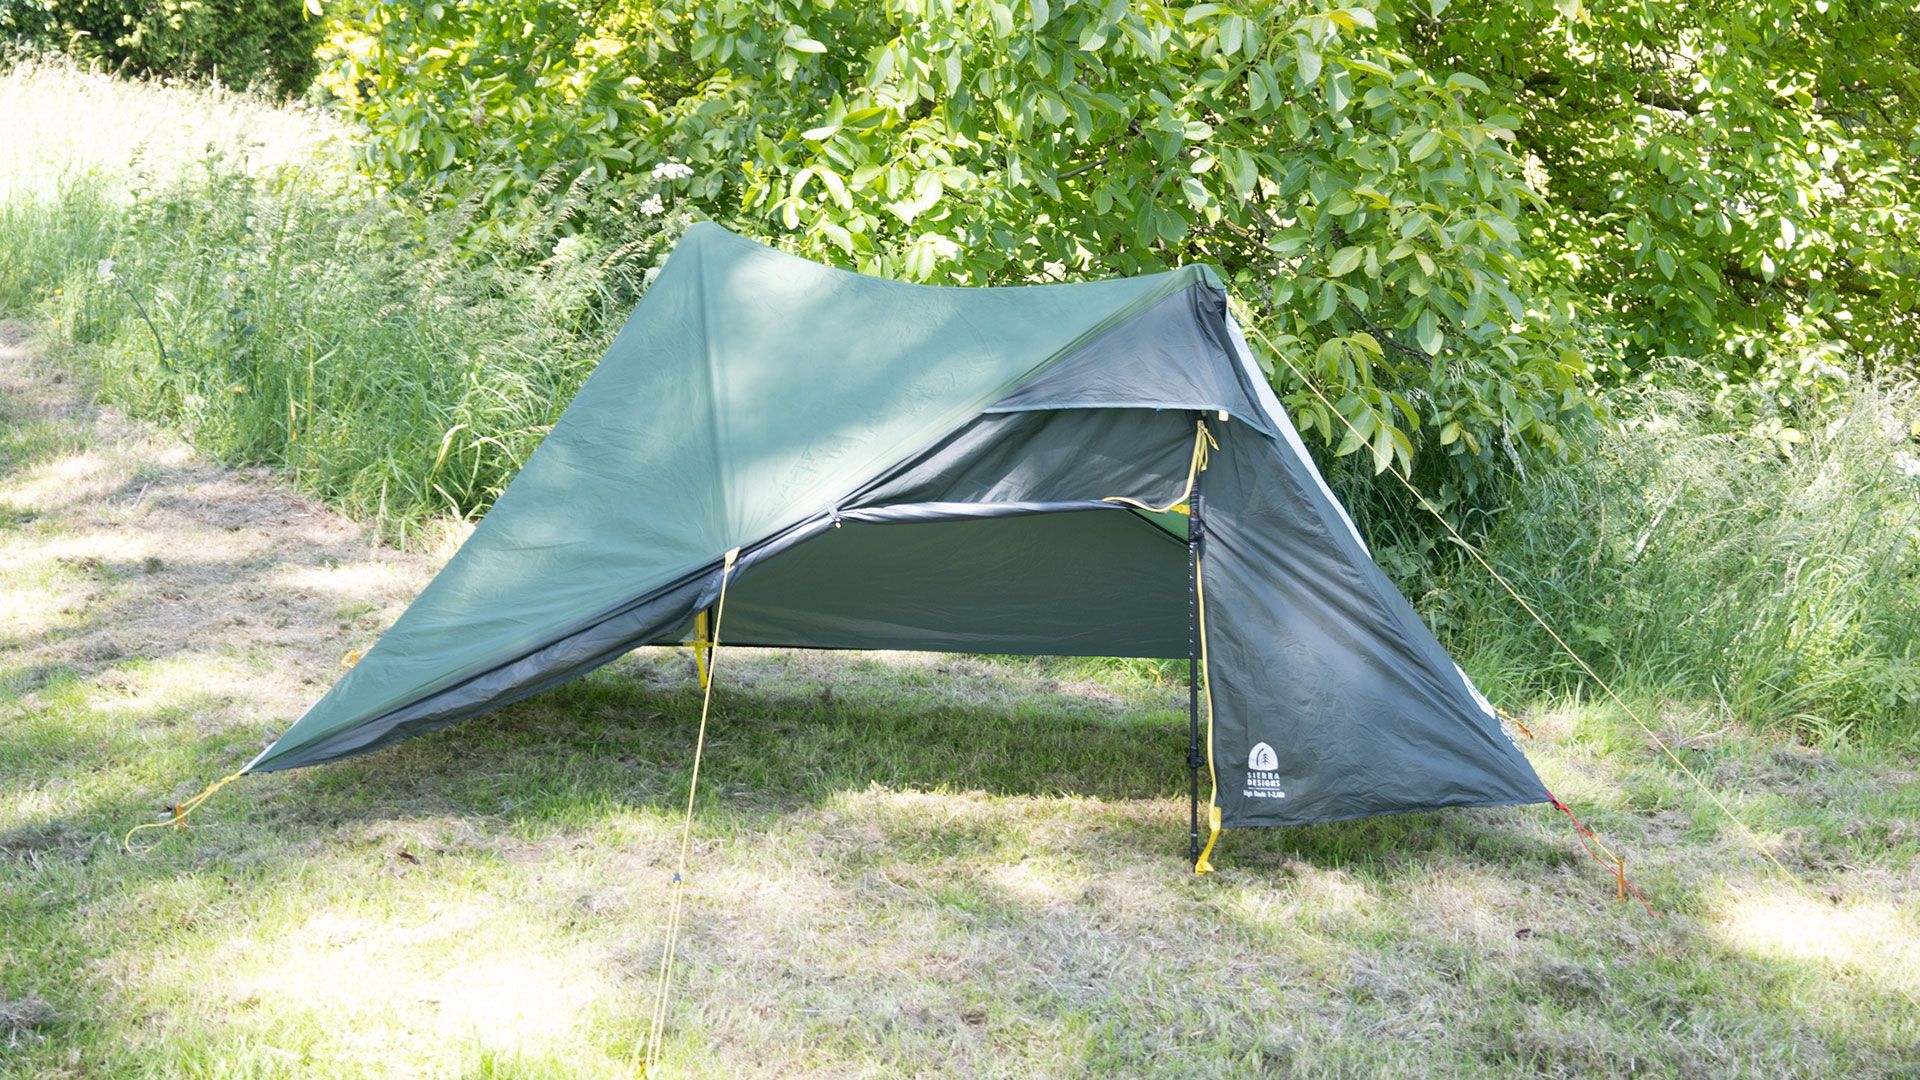 Sierra Designs High Route 1 3000 1P tent review | T3